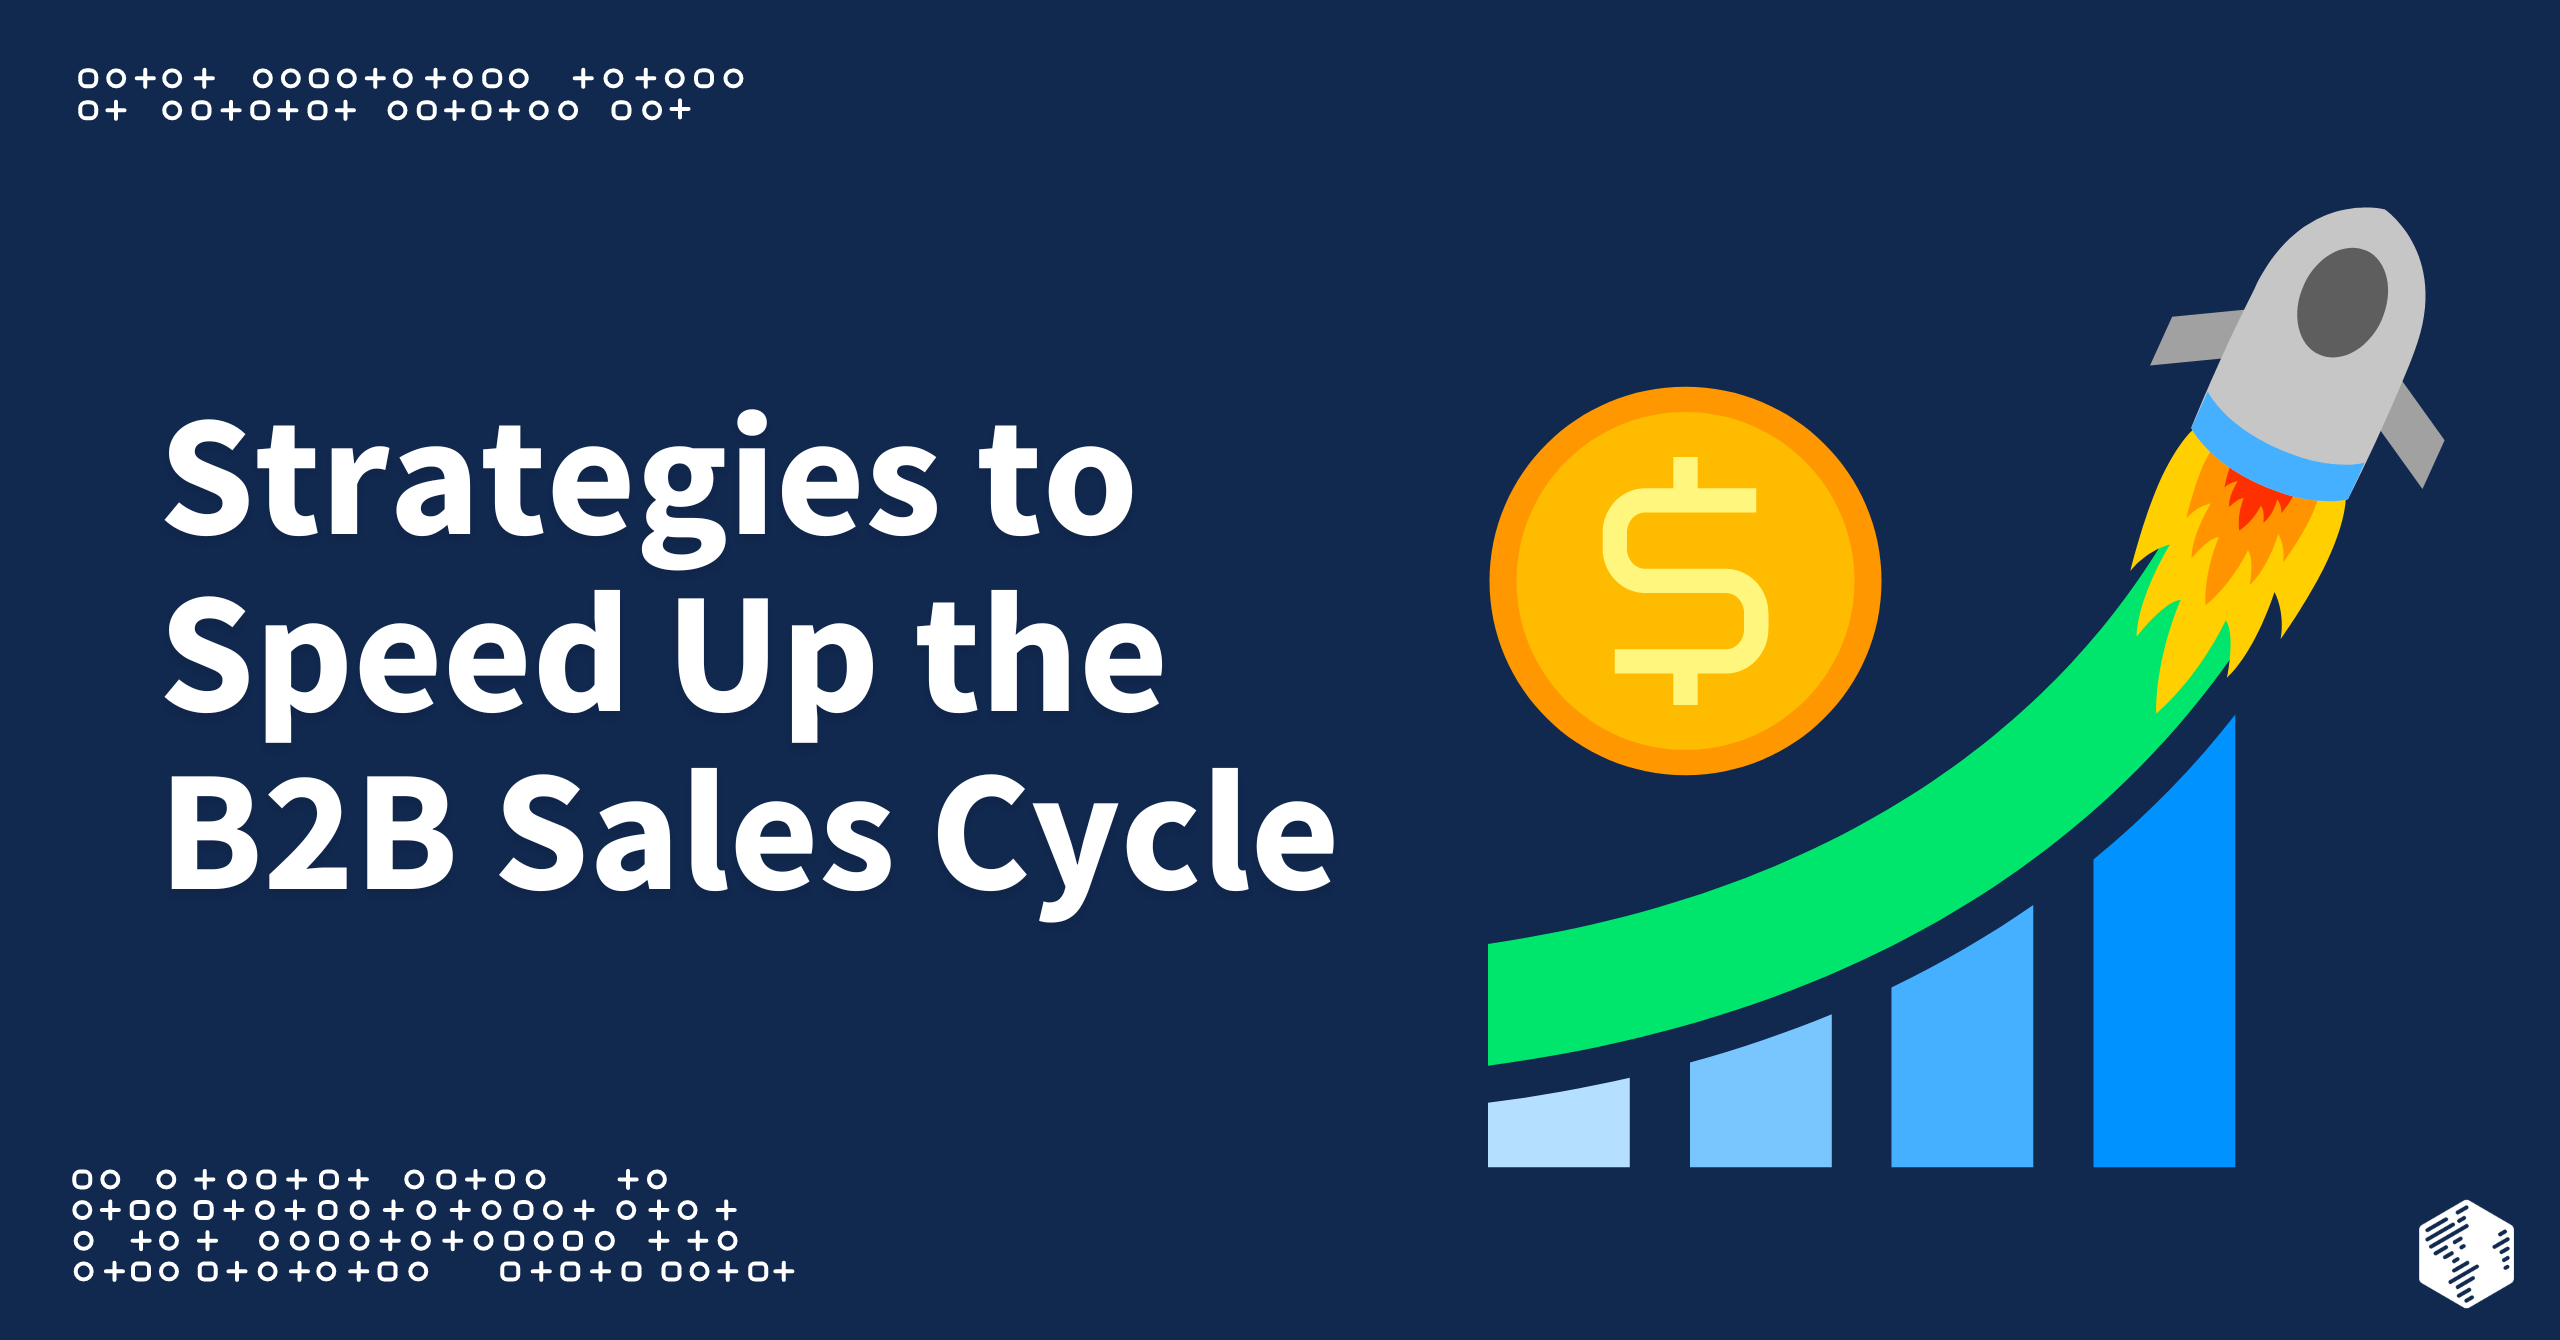 10 Strategies to Speed Up the B2B Sales Cycle